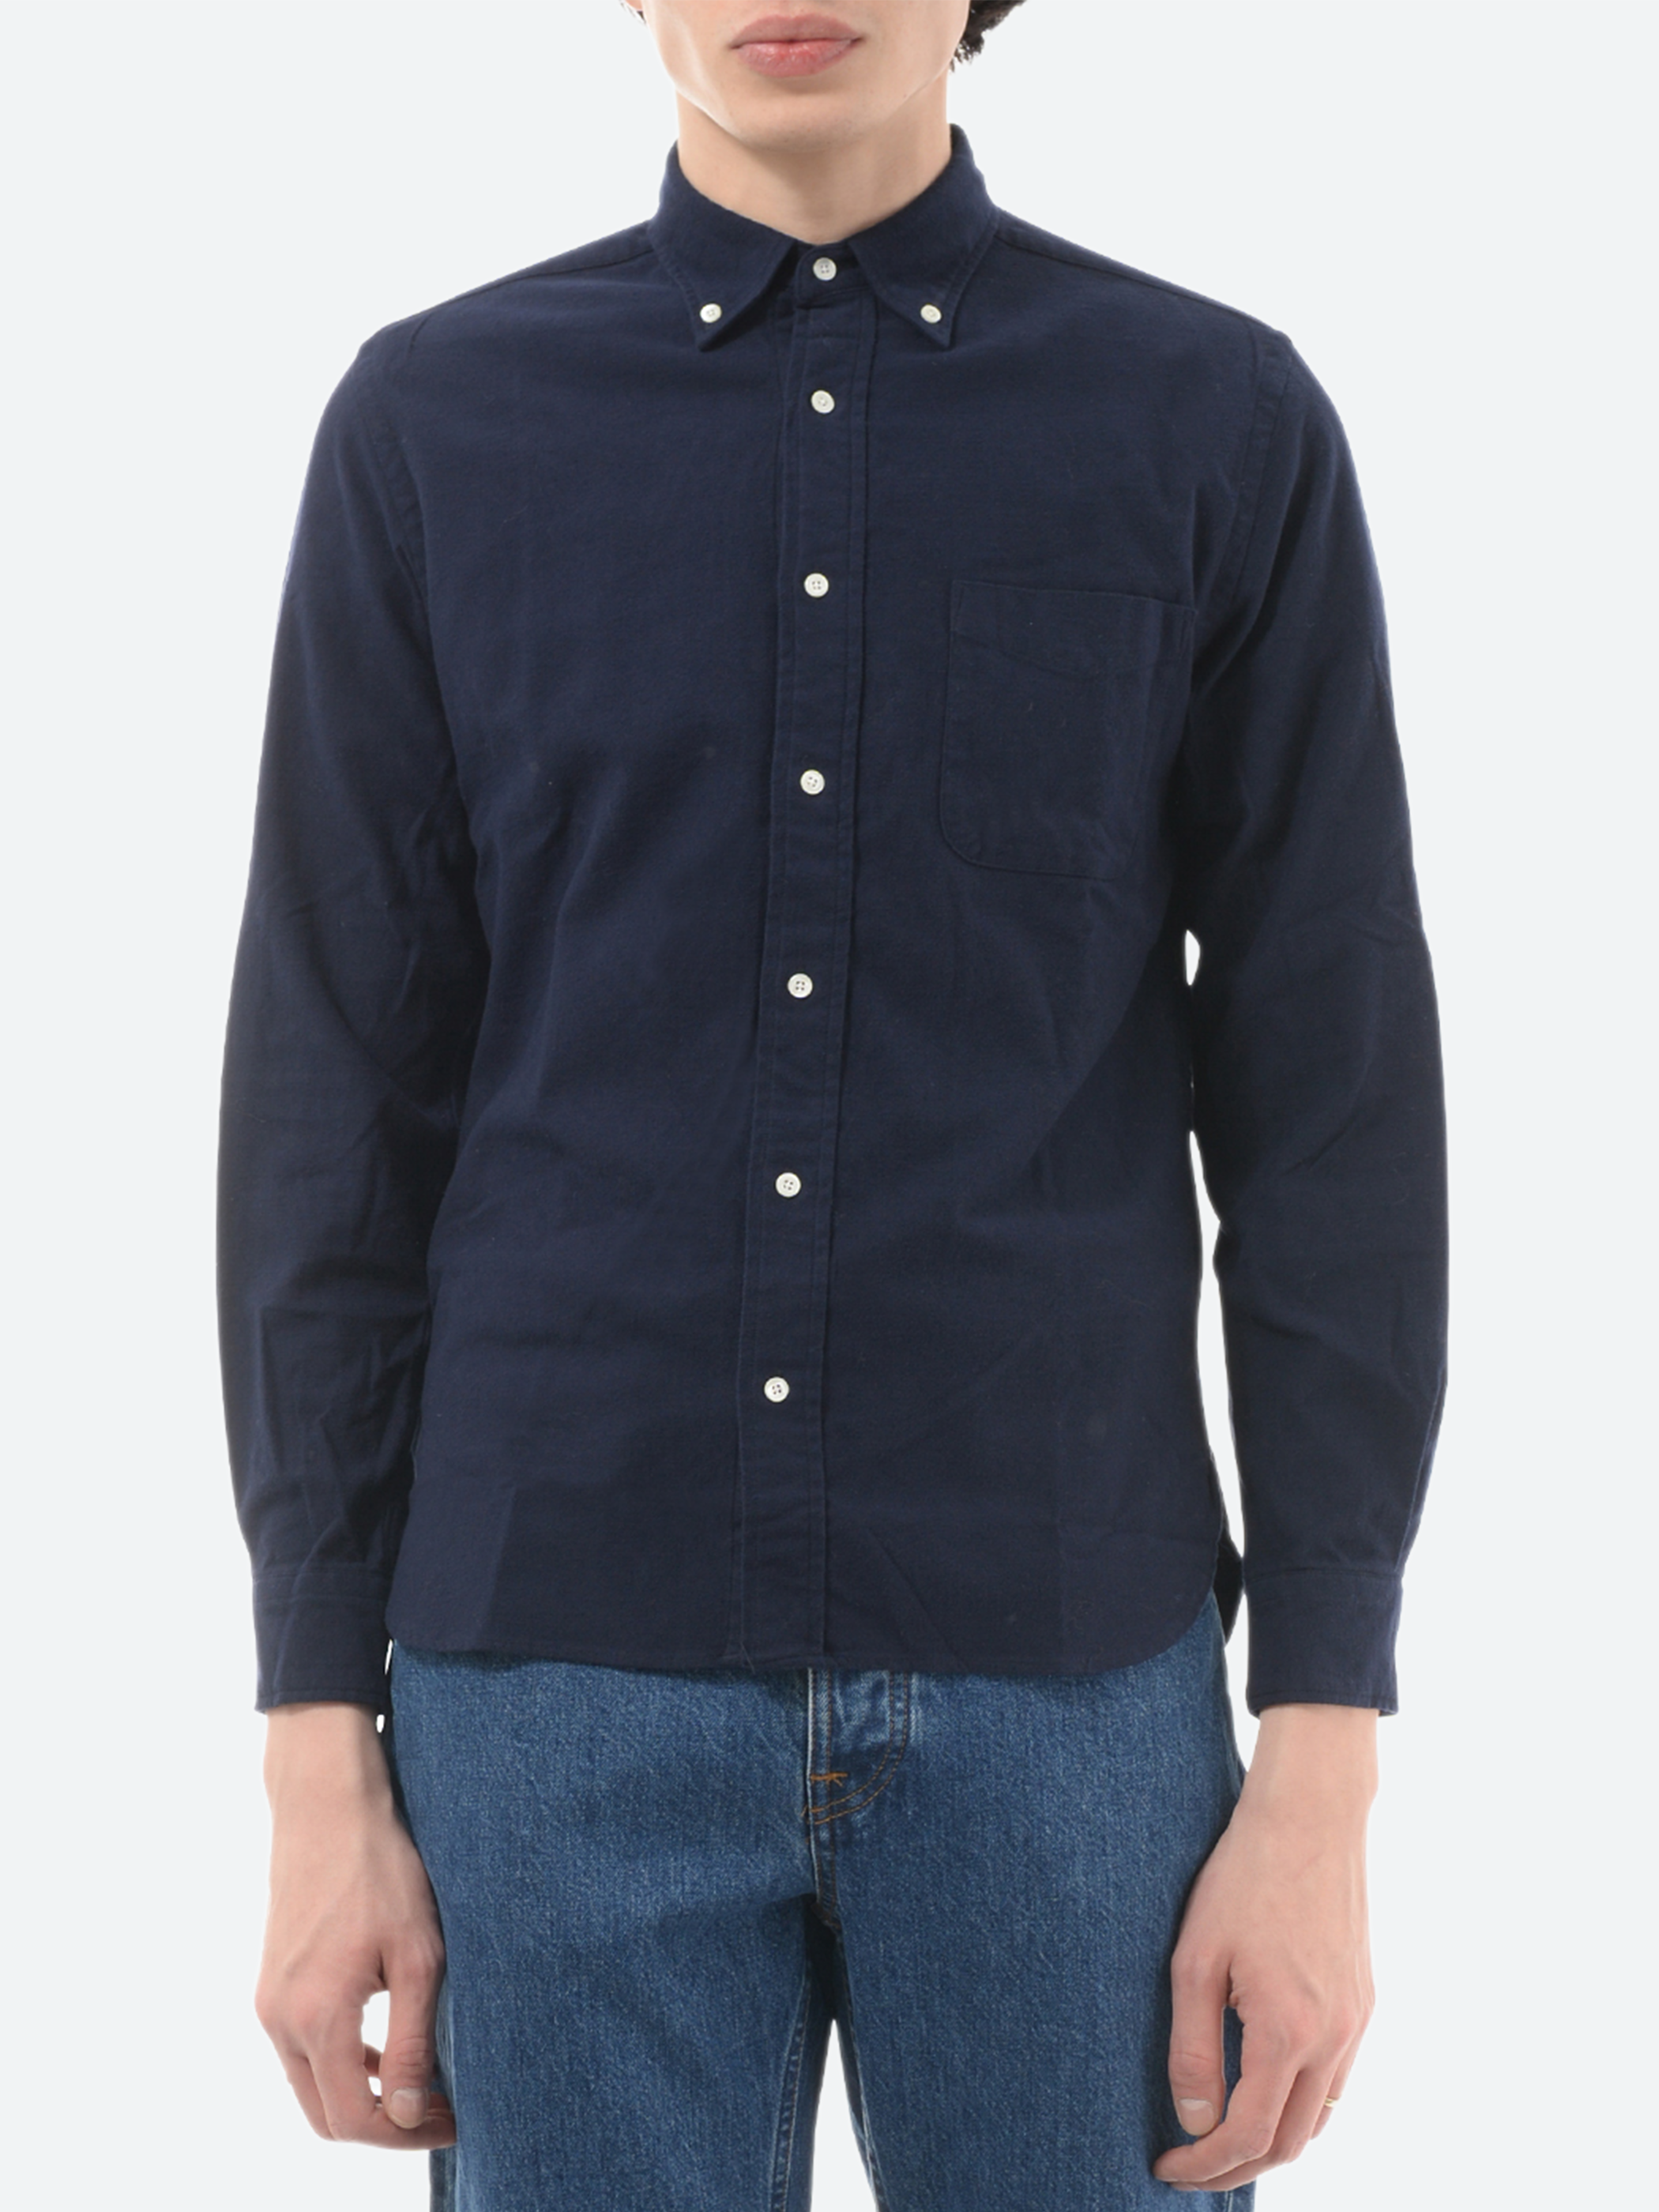 Flannel Solid Button Down Shirt